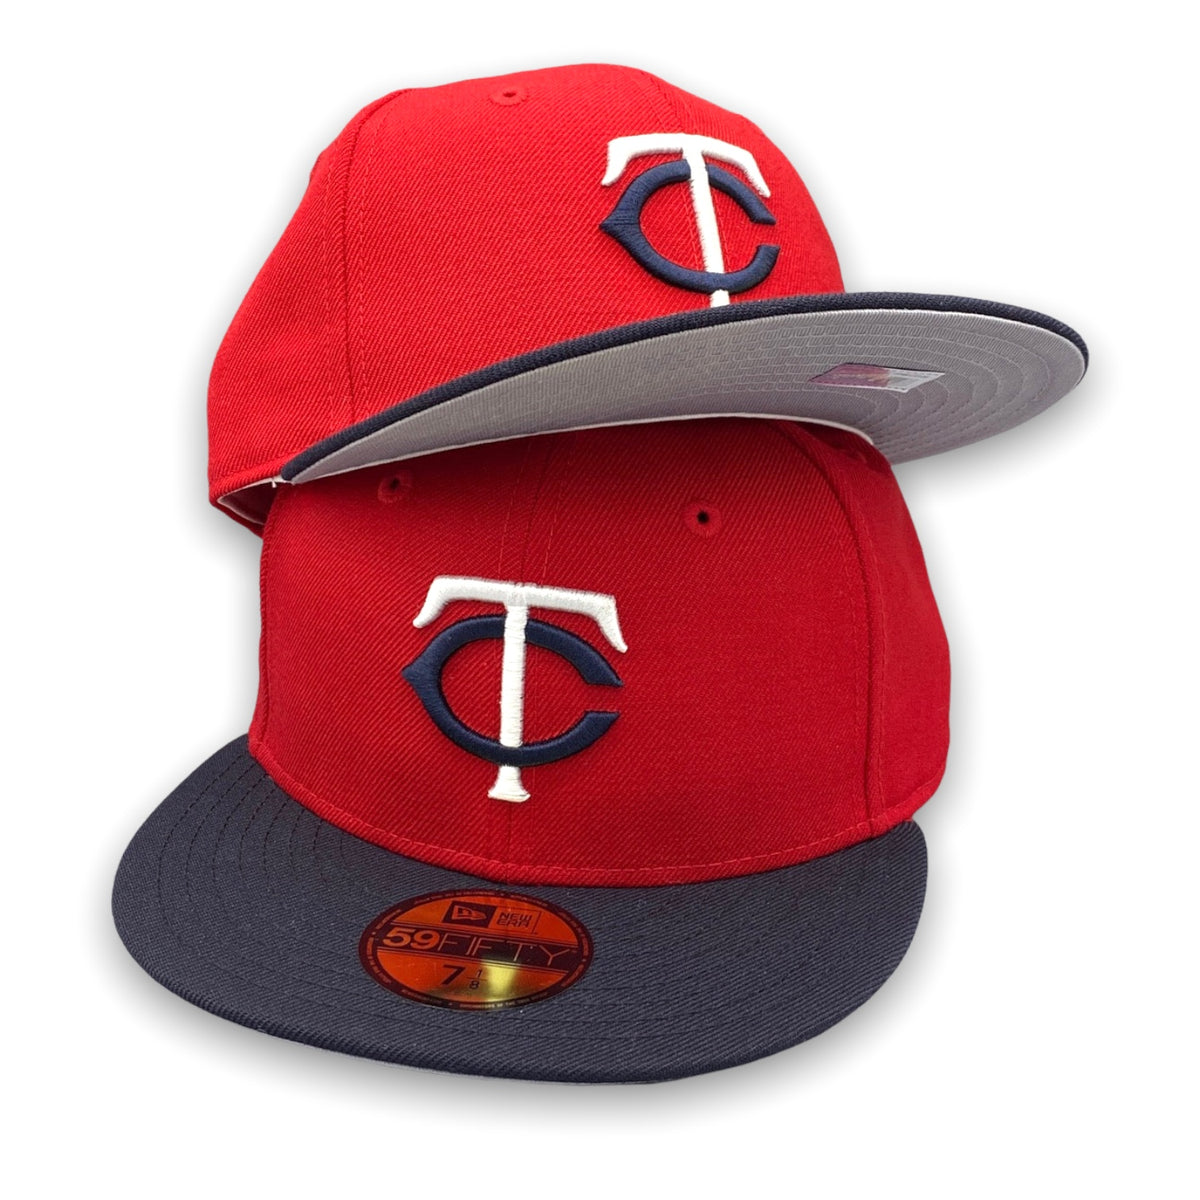 Minnesota Twins Basic Authentic Collection New Era 59FIFTY Red u0026 Navy Blue  Hat